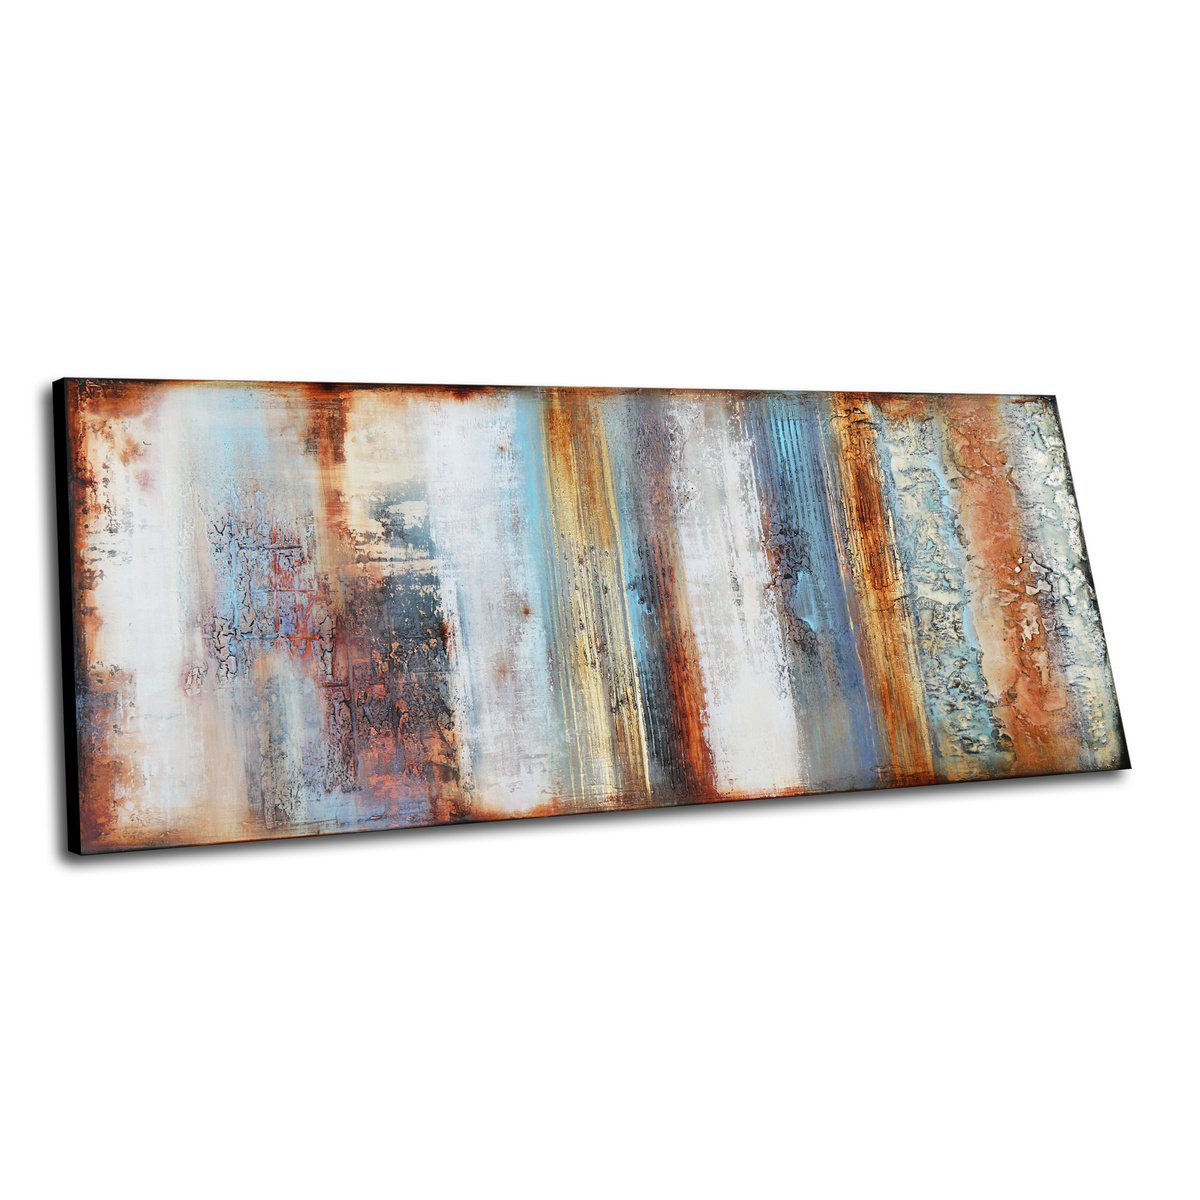 COLORS & TEXTURES * 120 x 50 cms - ABSTRACT ART - WITH STRUCTURES by Inez Froehlich